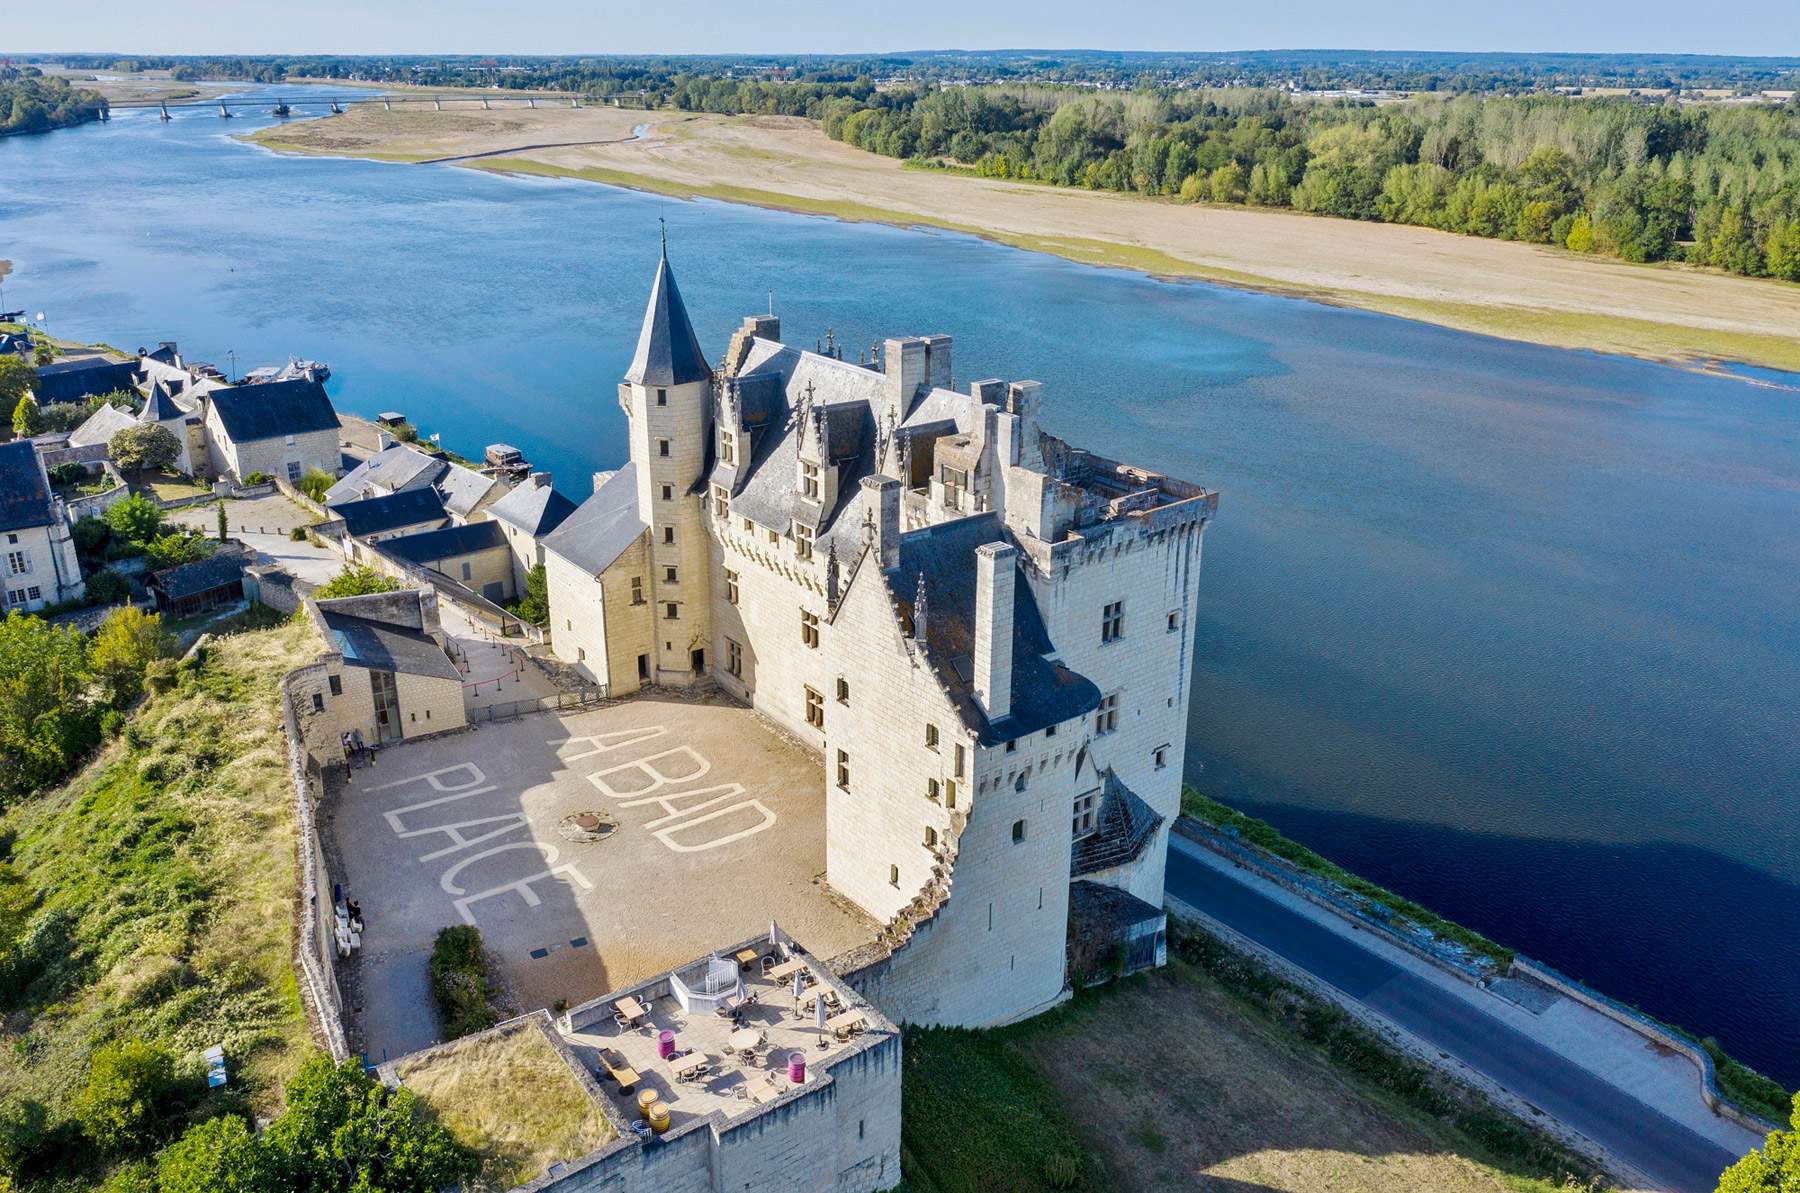 This wonderful Loire chateau, Montsoreau, has come up with the take-home exhibition